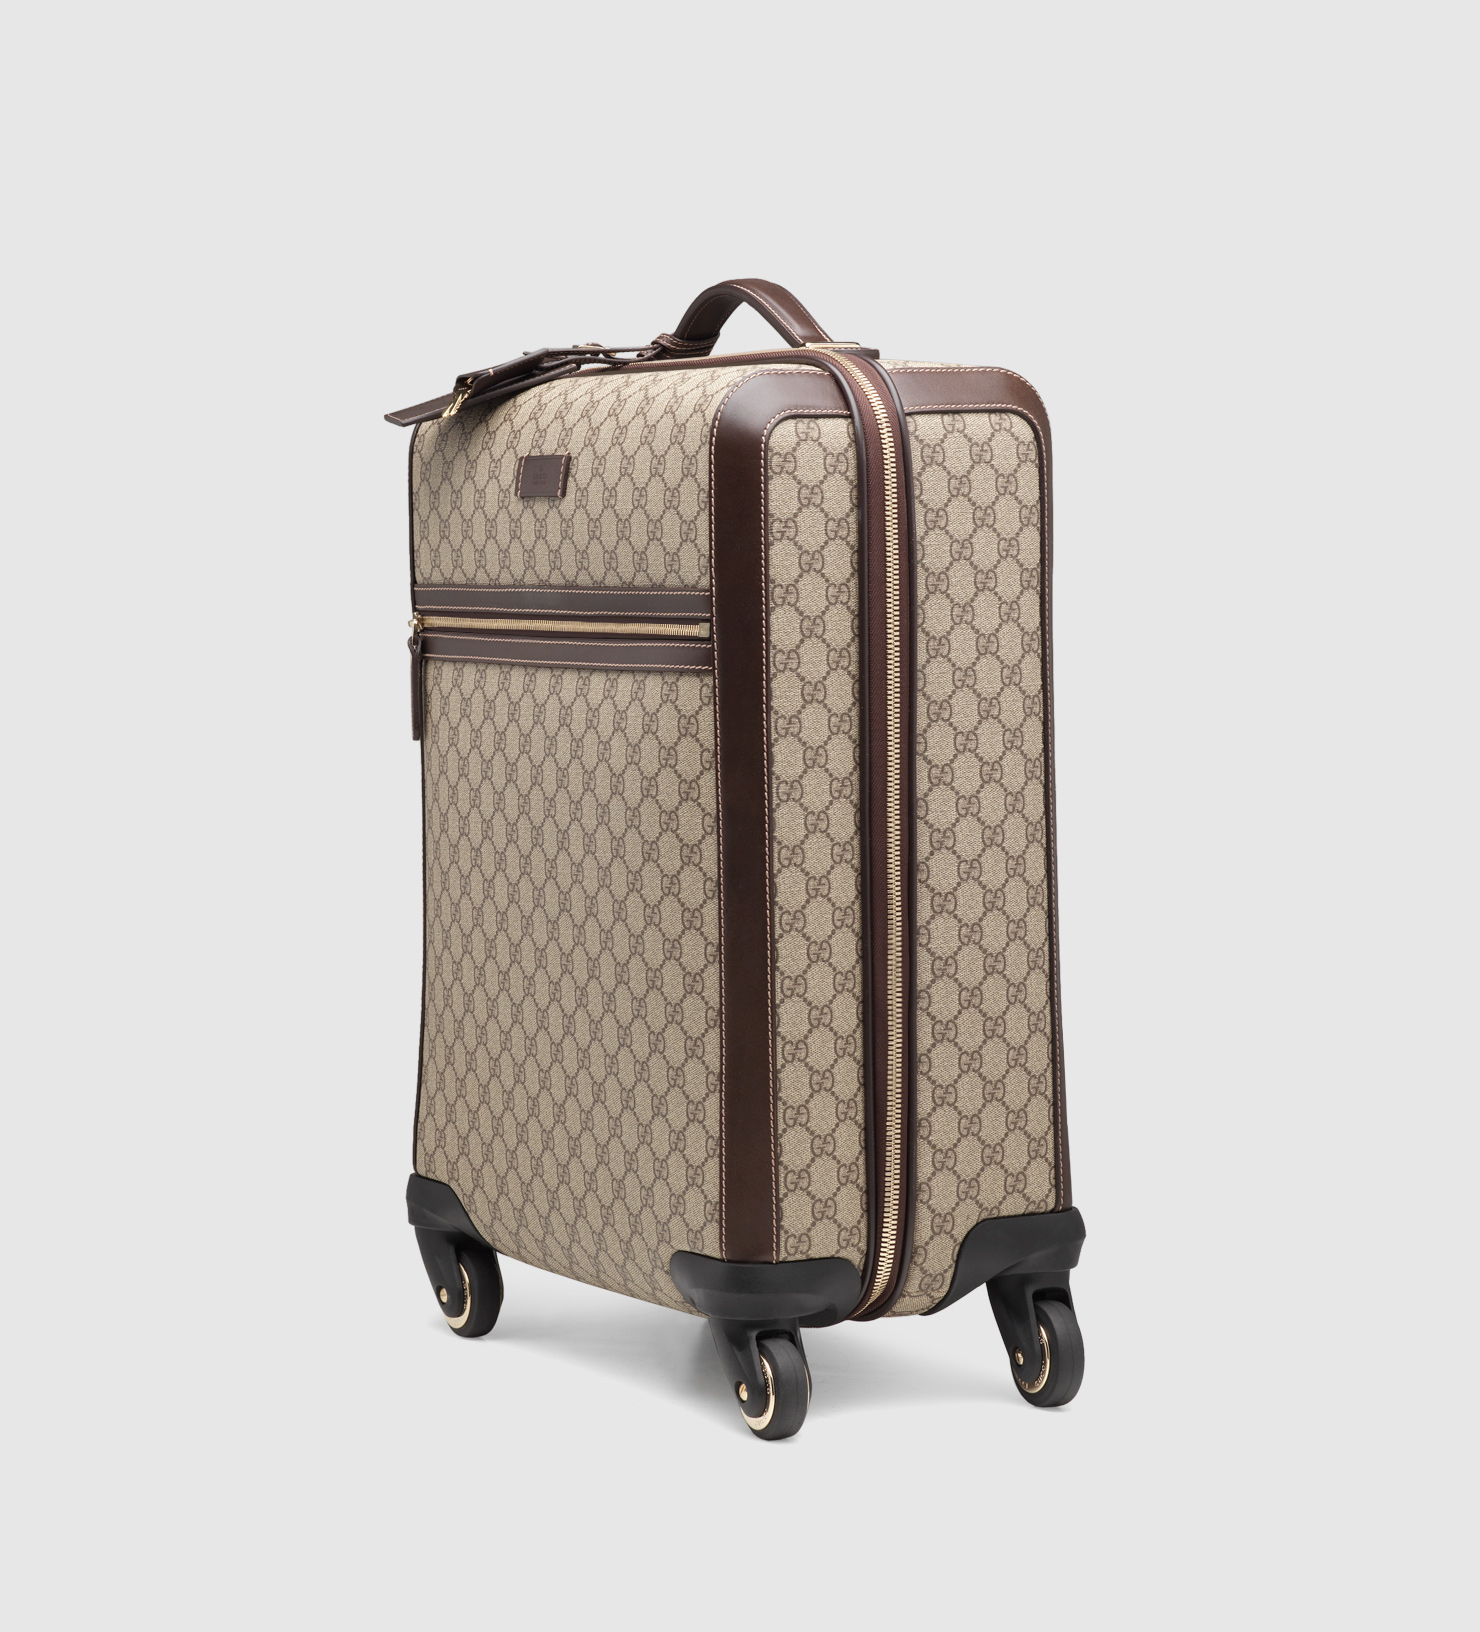 Gucci Gg Supreme Canvas Four Wheel Carry-on Suitcase in Gray - Lyst